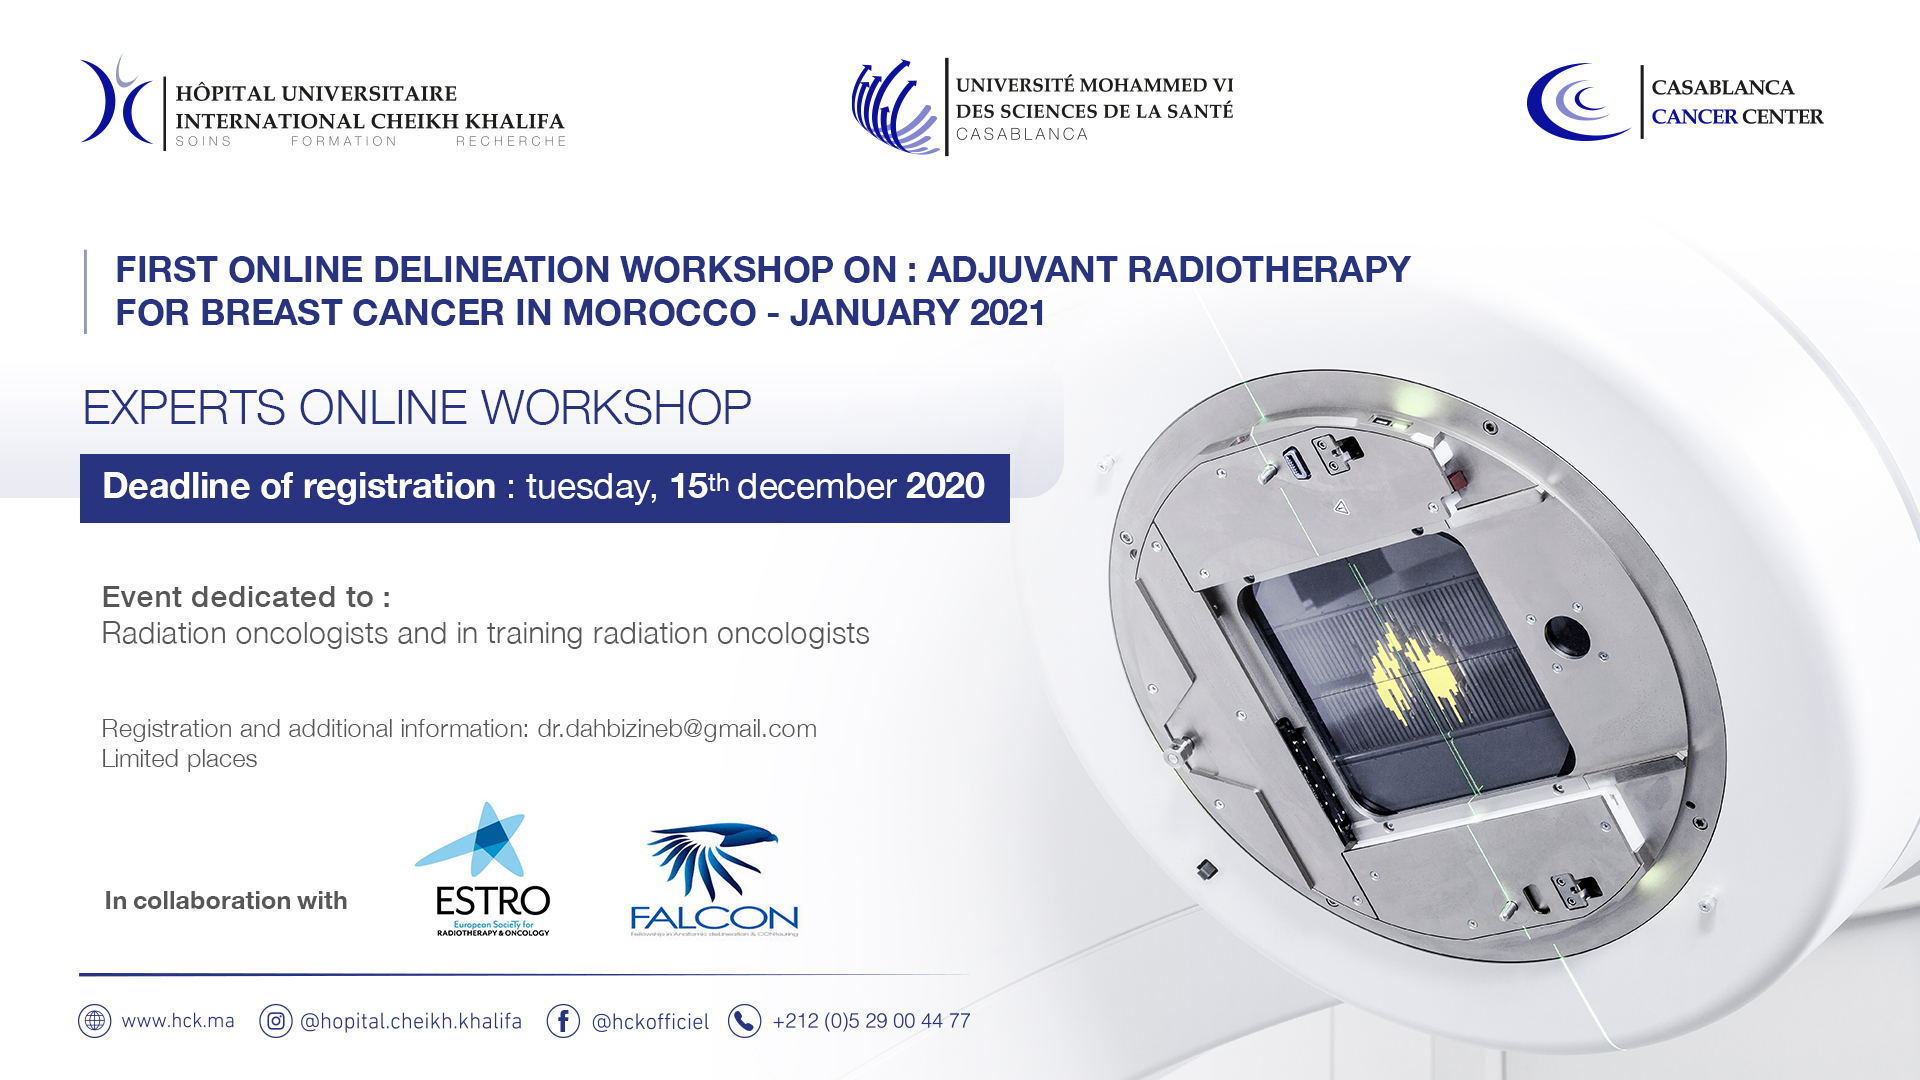 FIRST ONLINE DELINEATION WORKSHOP ON: ADJUVANT RADIOTHERAPY FOR BREAST CANCER IN MOROCCO - JANUARY 2021